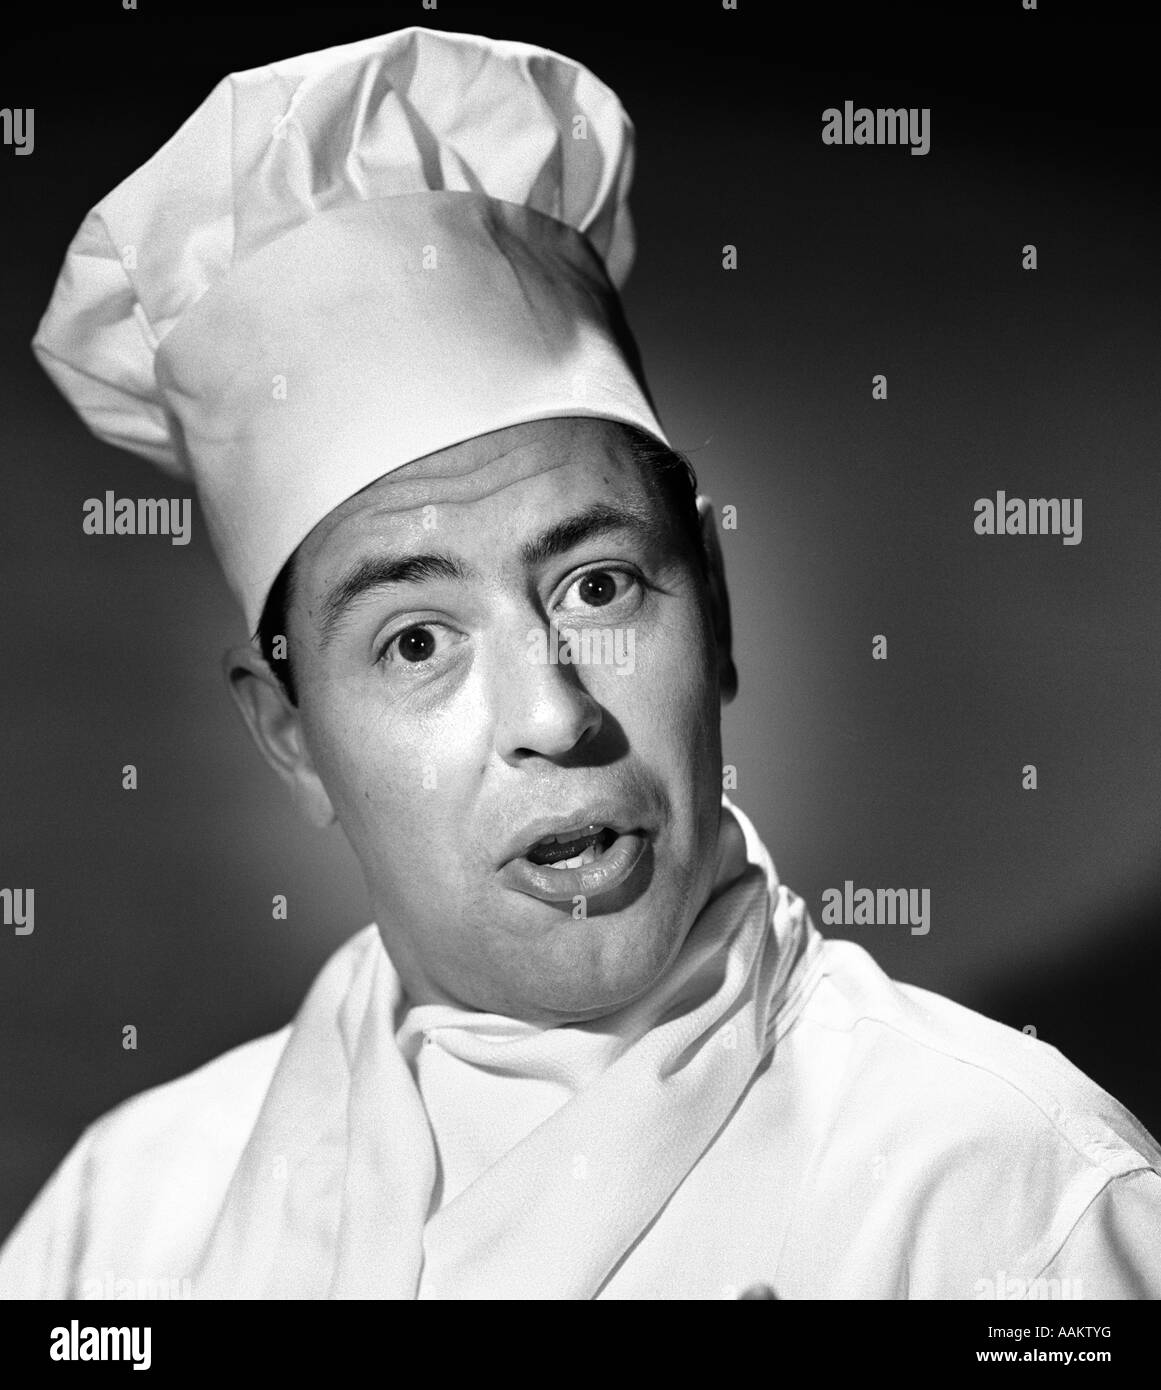 1950s PORTRAIT MAN CHEF HUMOROUS EXPRESSION LOOKING AT CAMERA Stock Photo